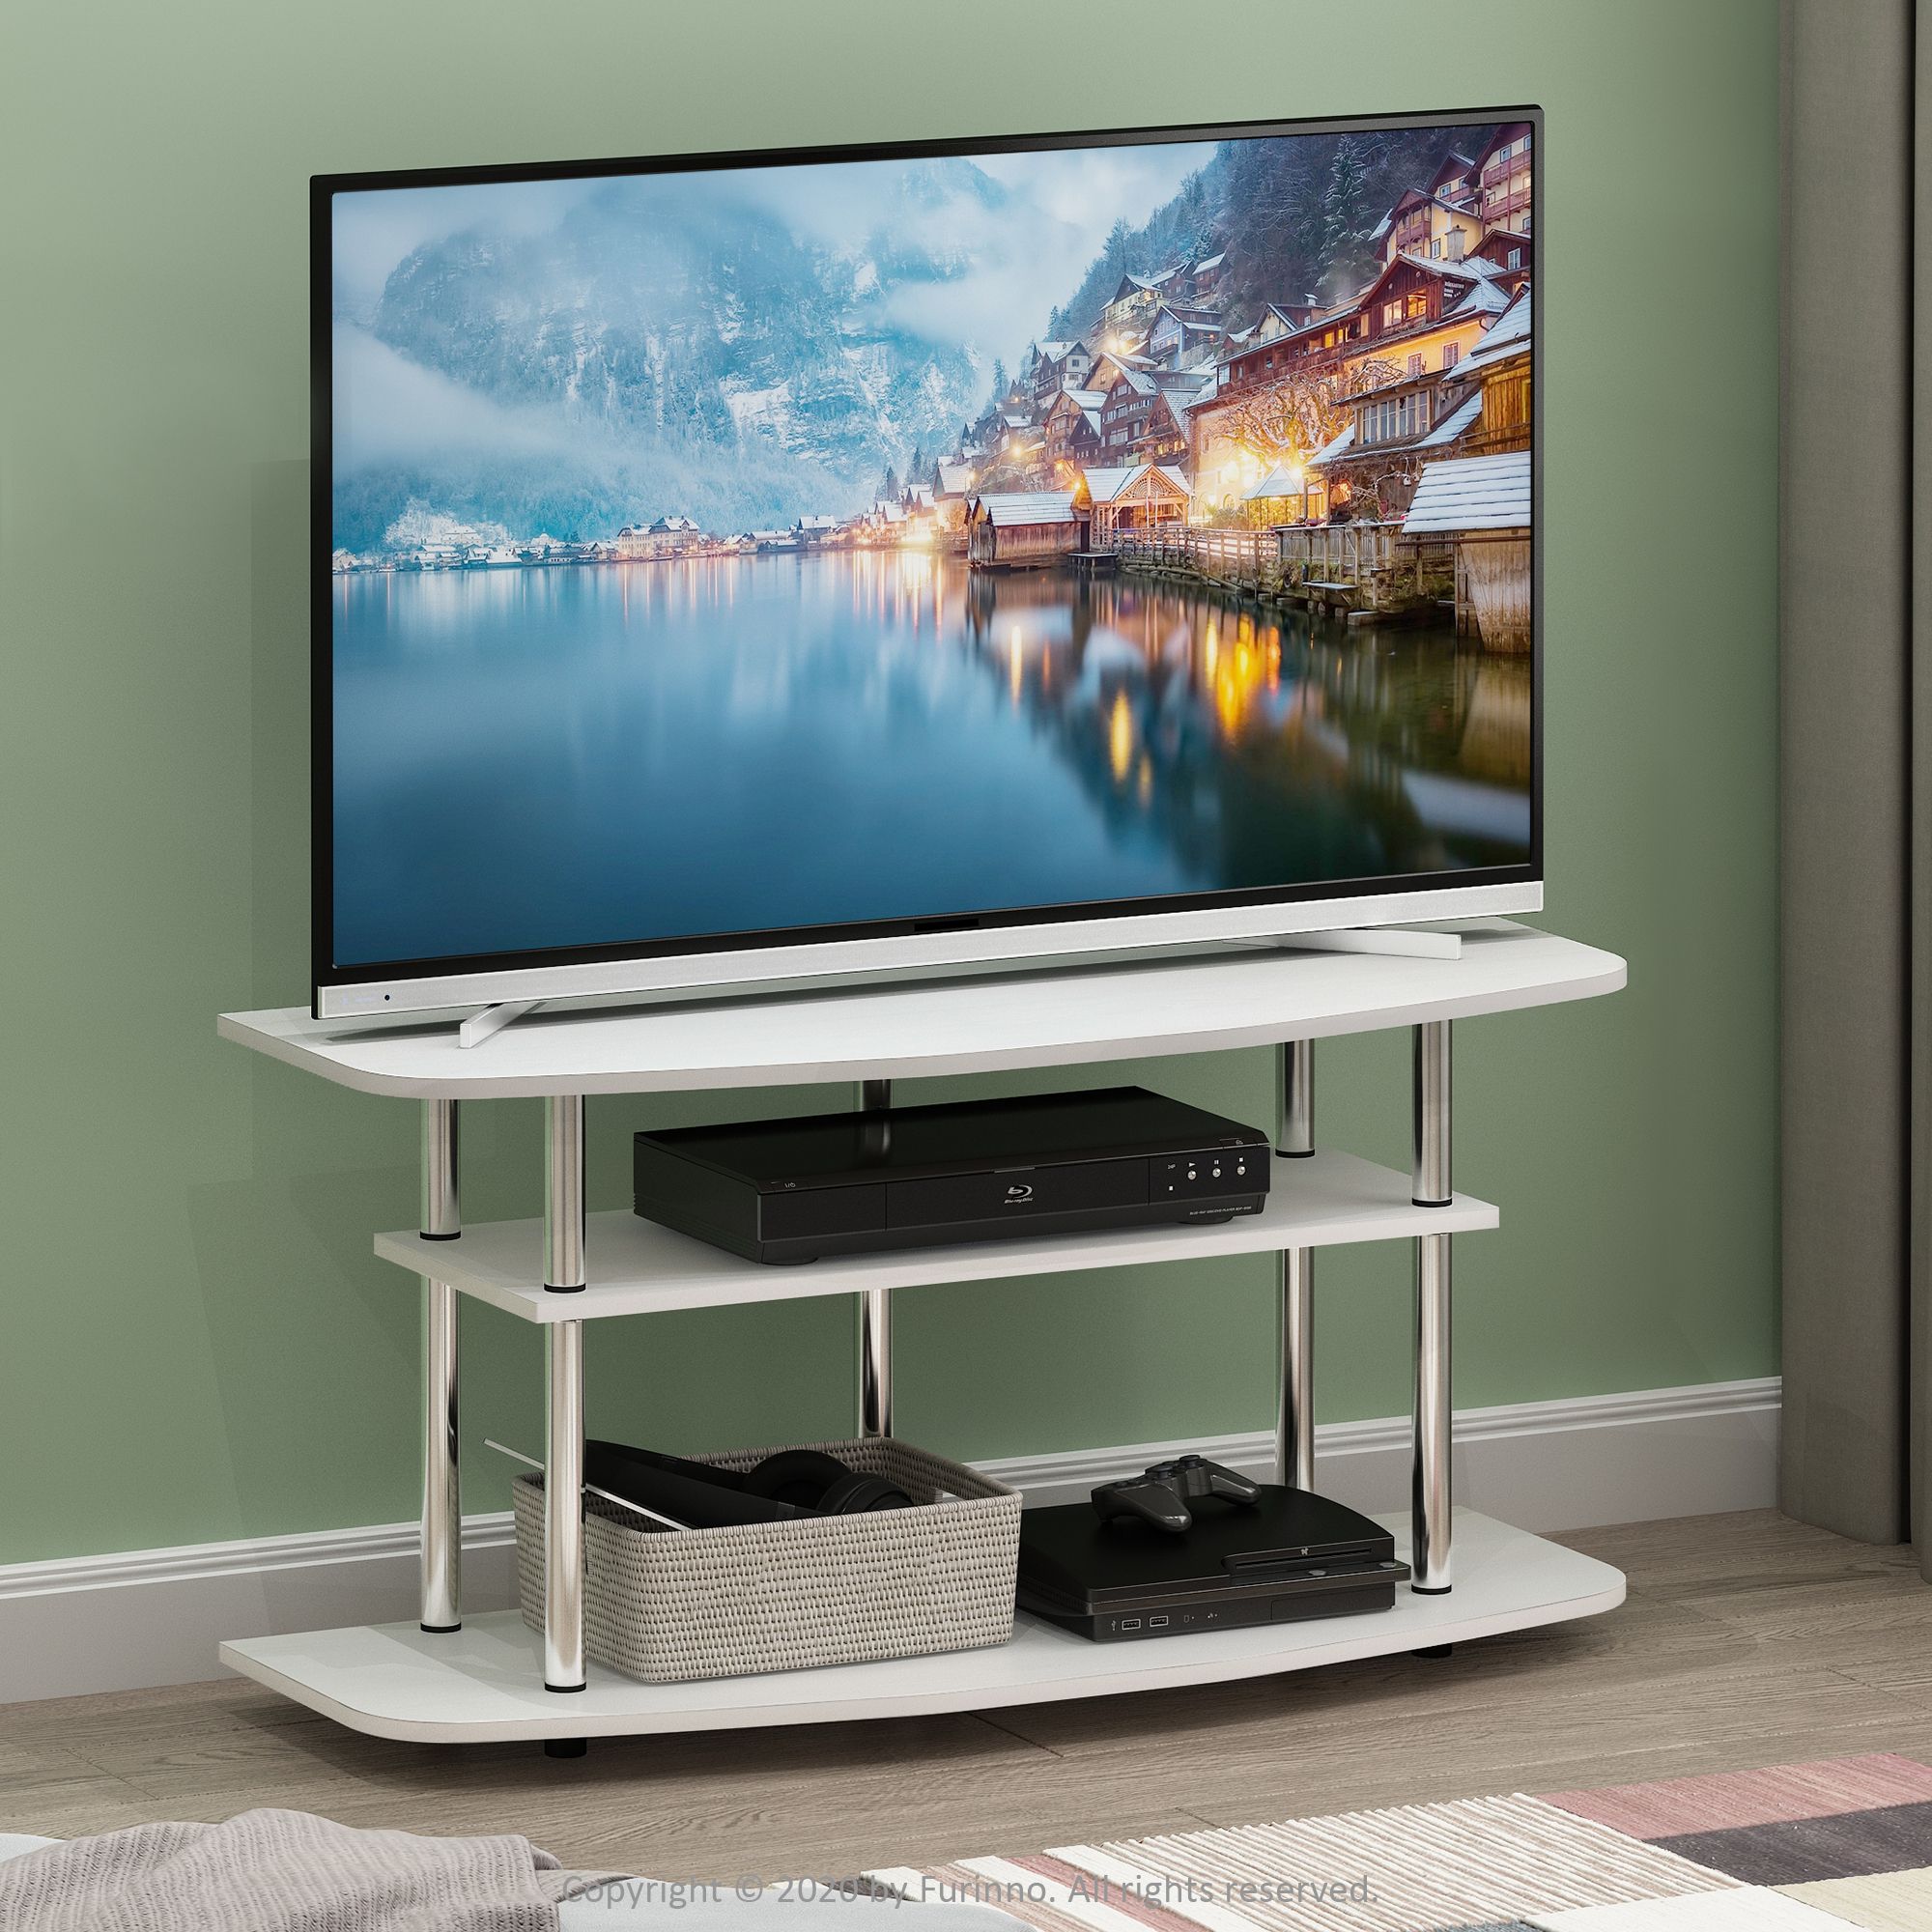 Furinno Frans Turn N Tube 3 Tier Tv Stand For Tv Up To 46 Regarding Furinno Turn N Tube No Tool 3 Tier Entertainment Tv Stands (View 5 of 15)